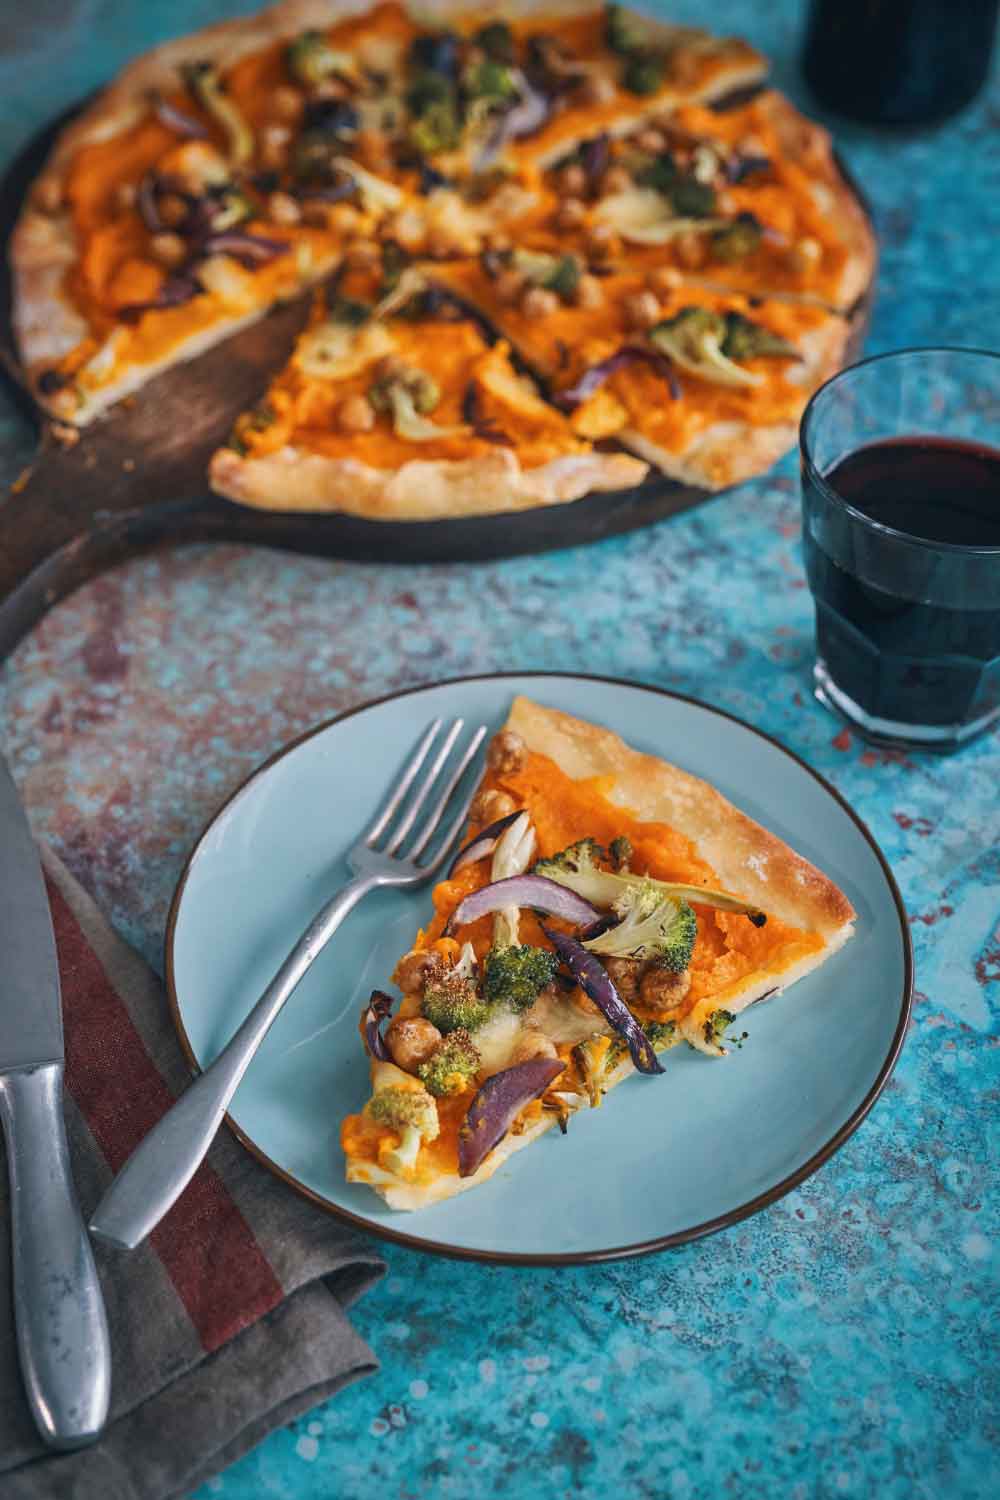 Pumpkin and Chickpea Pizza With Prawns